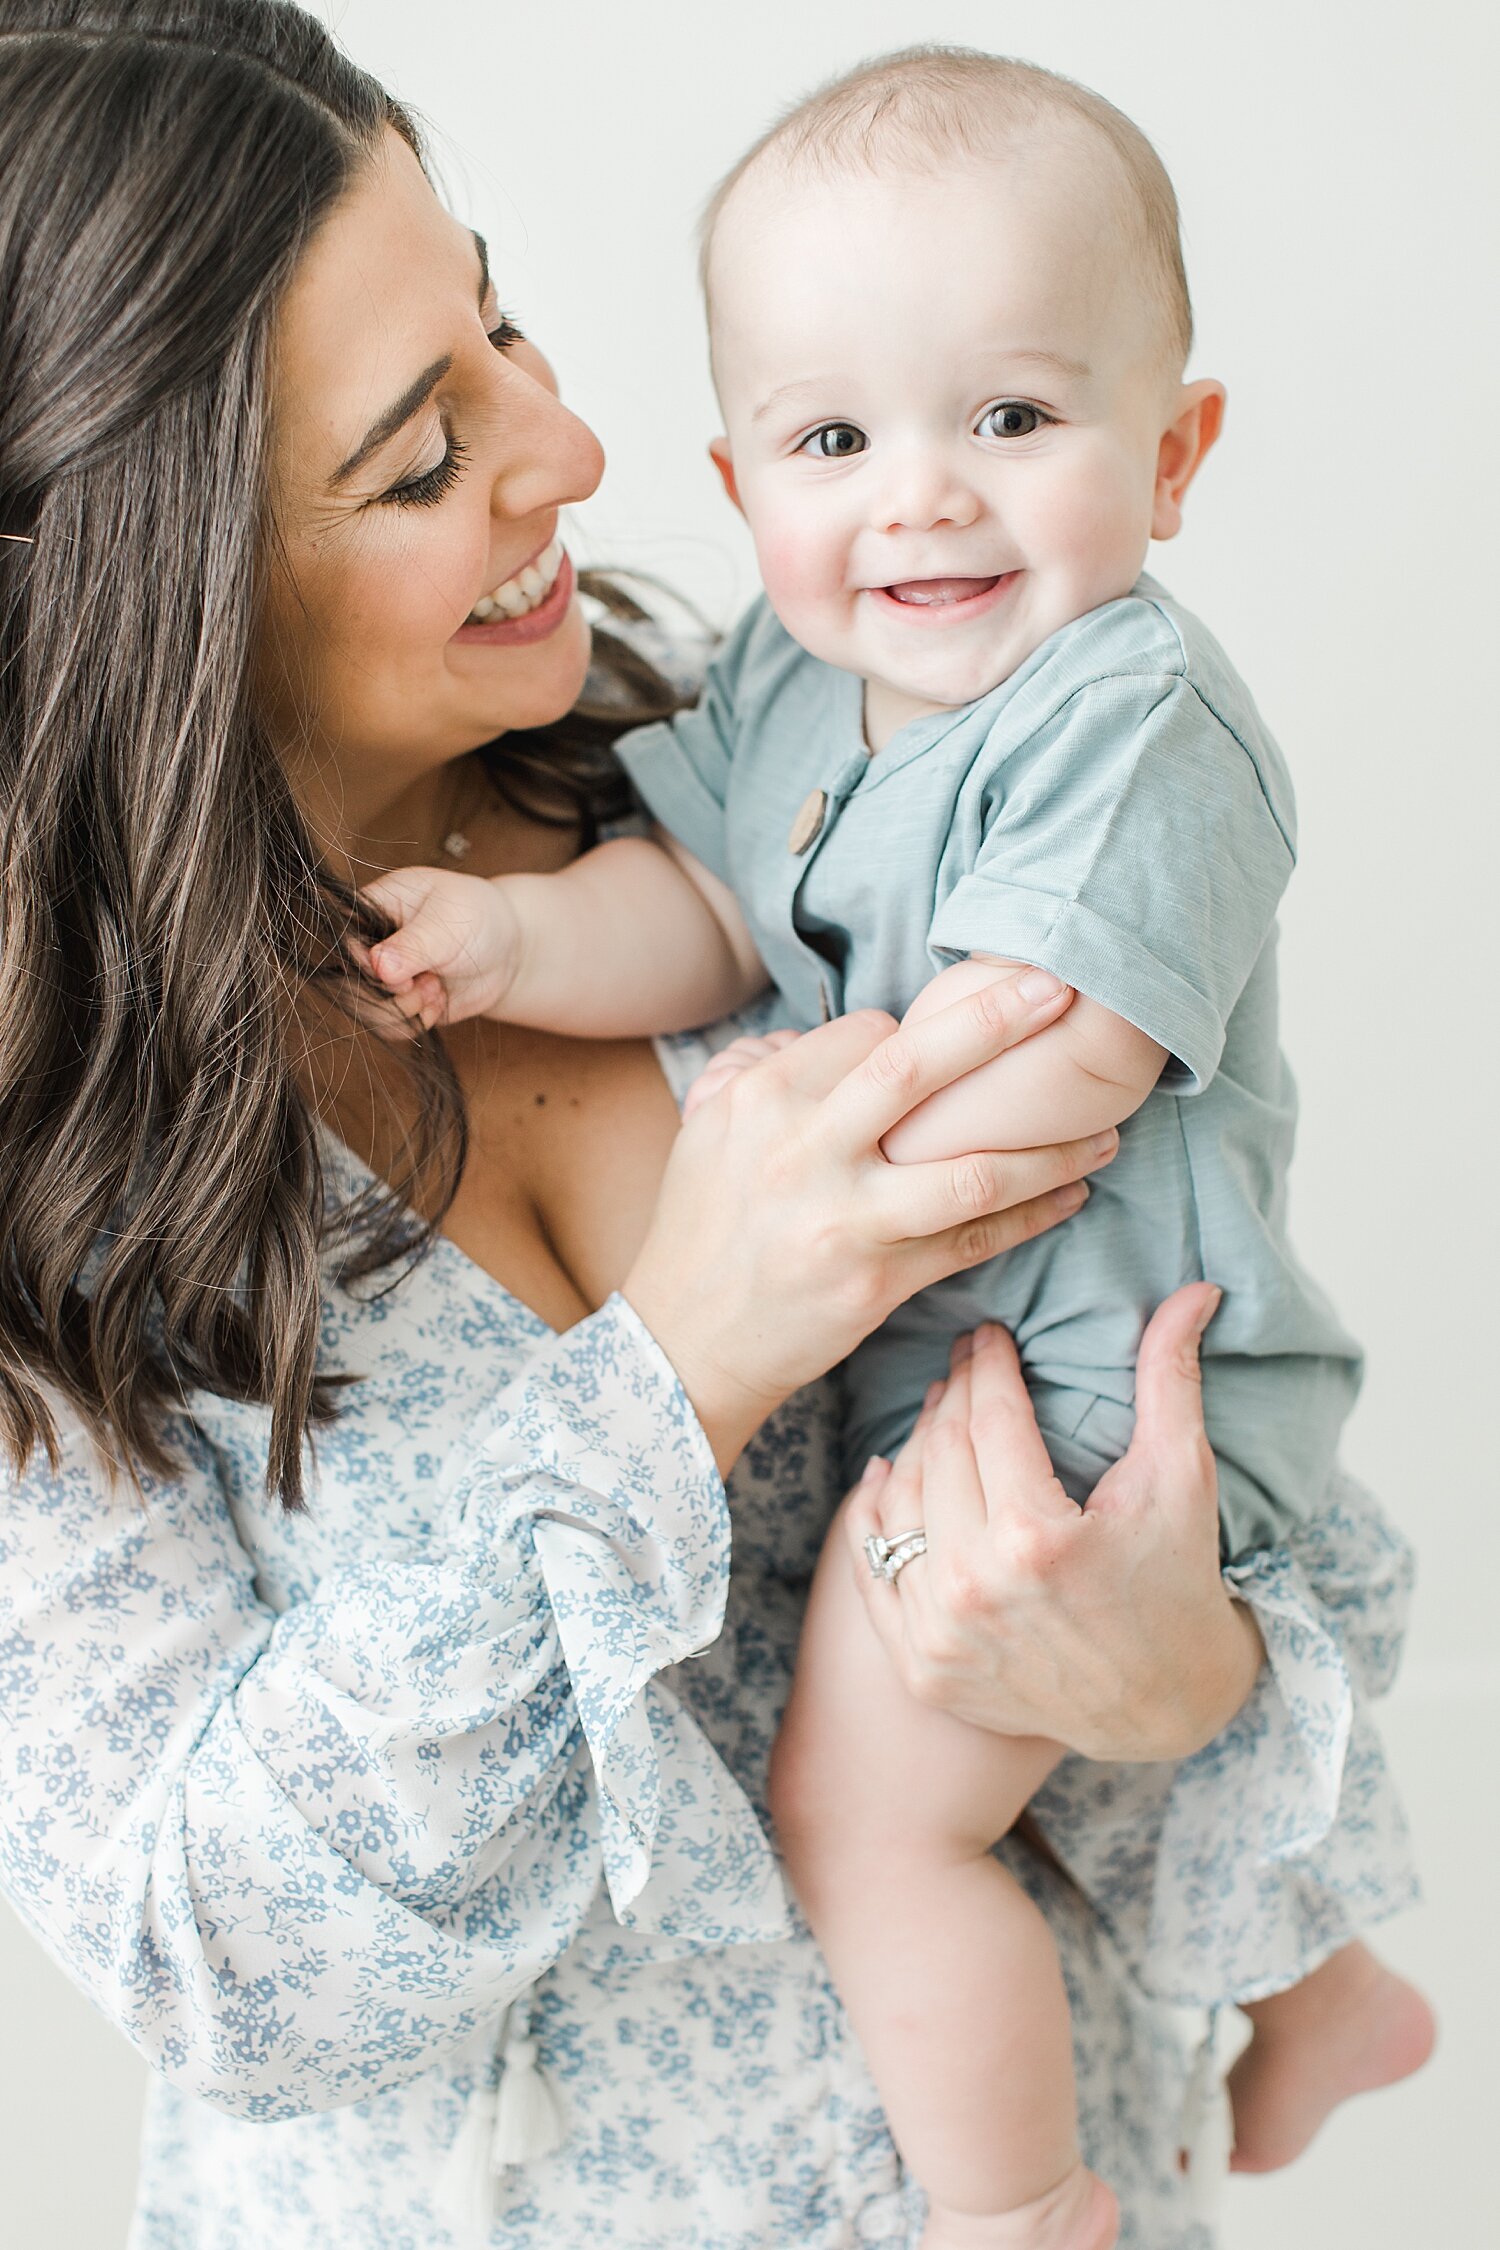 Mom smiling and looking at her son. Photos by Kristin Wood Photography.